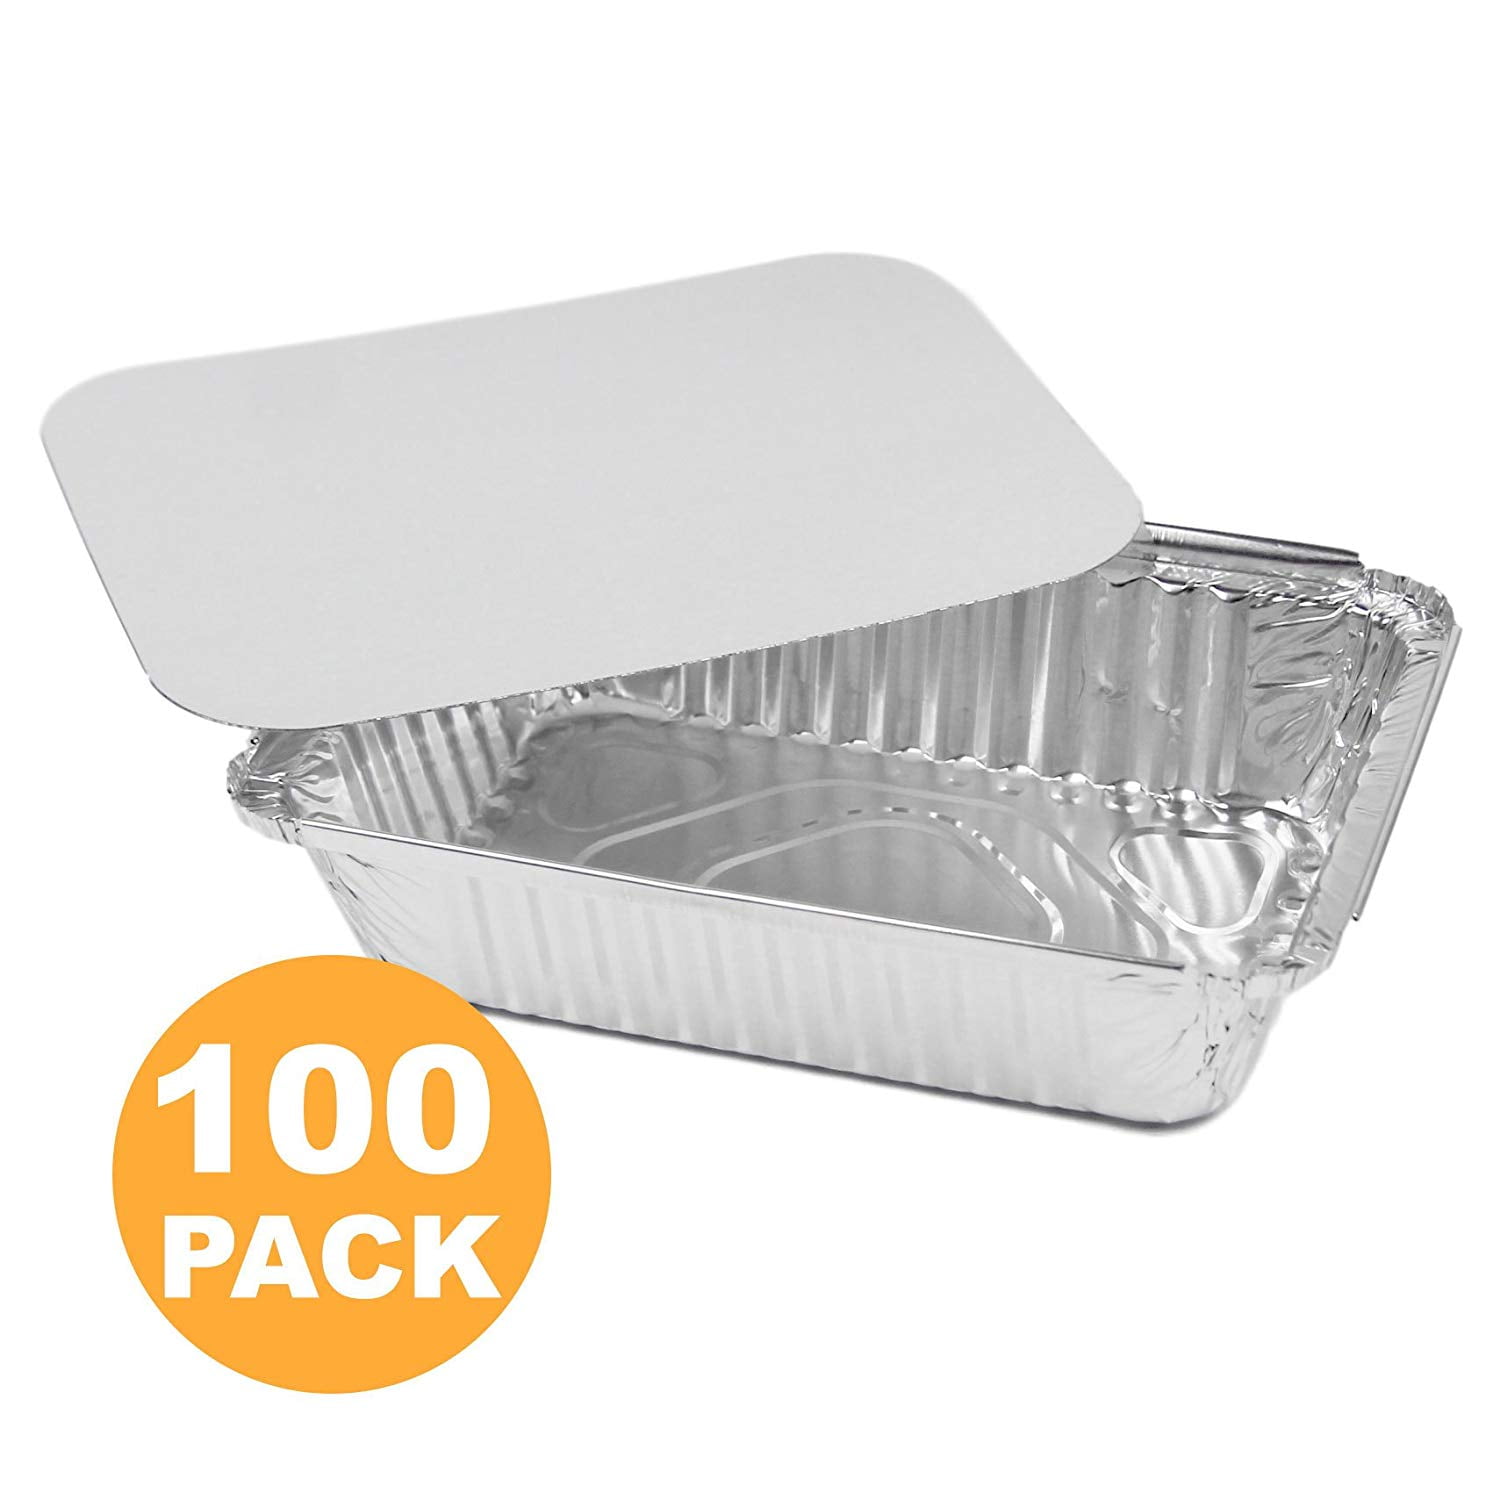 9" x 9" NO9 LARGE ALUMINIUM FOIL FOOD CONTAINERS WITH LIDS OVEN BAKING TAKE AWAY 